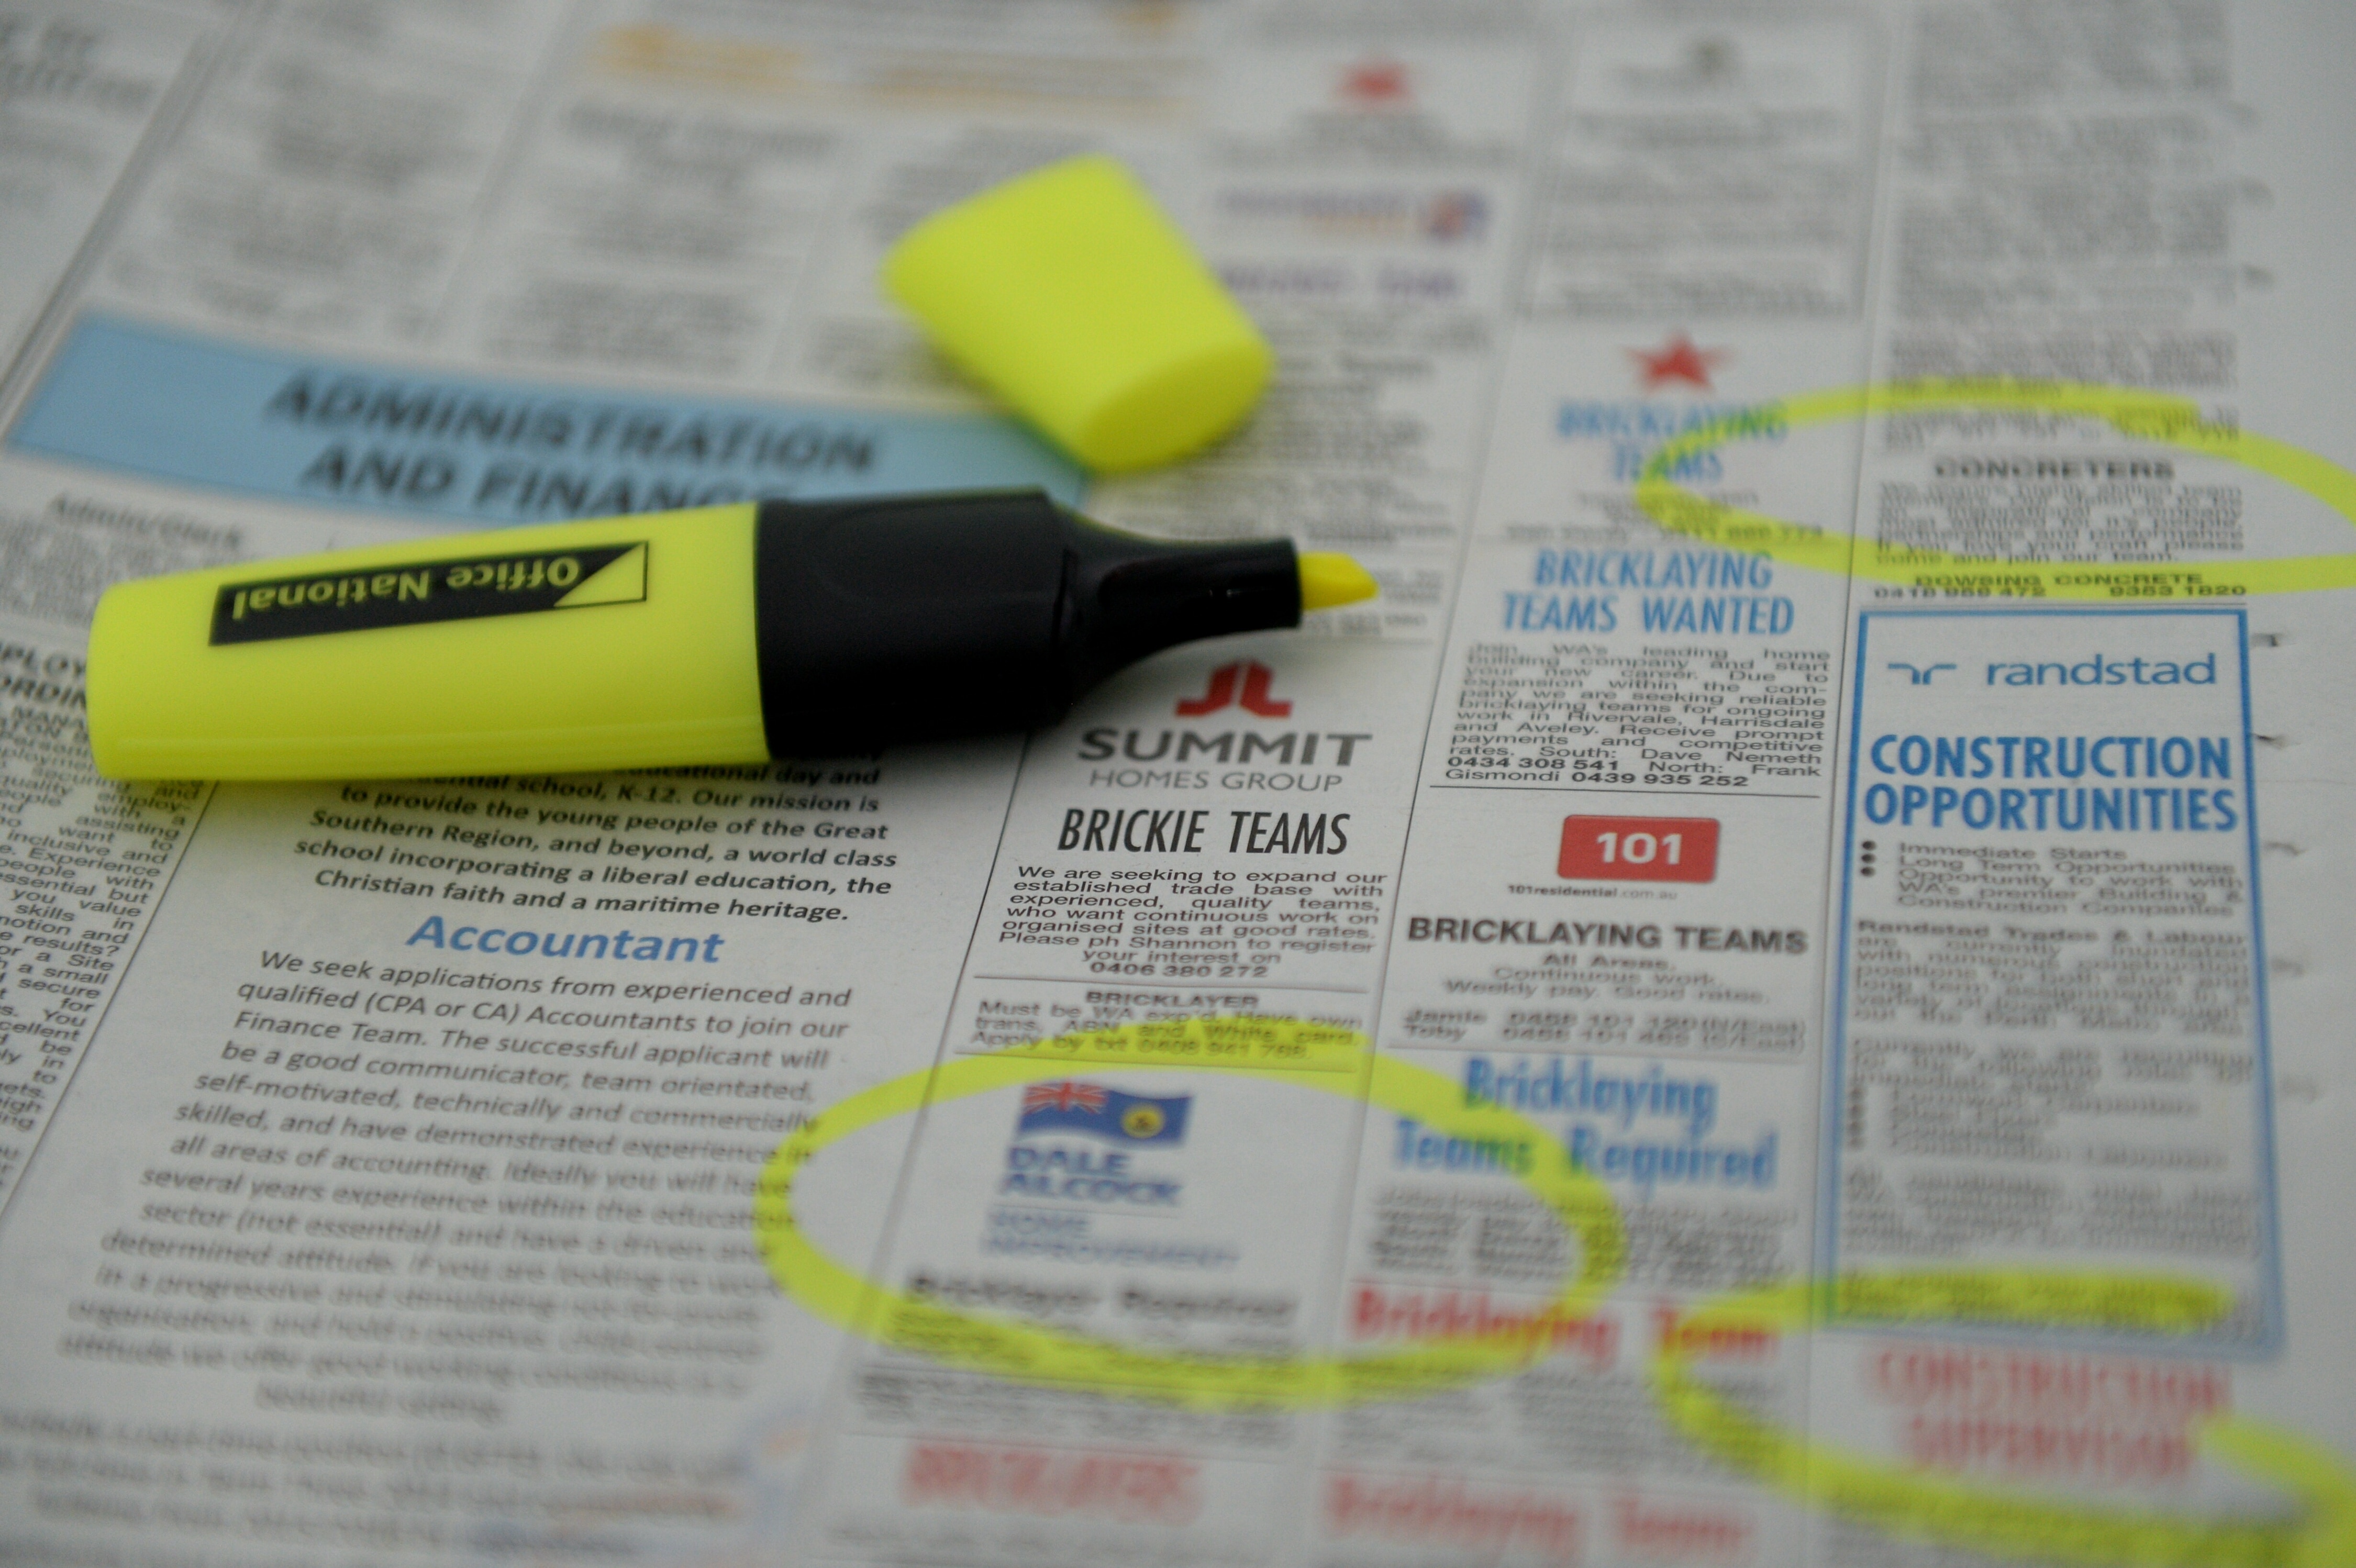 Employment advertising is seen in a newspaper in Canberra, Thursday, April 10, 2014. (AAP Image/Lukas Coch) NO ARCHIVING